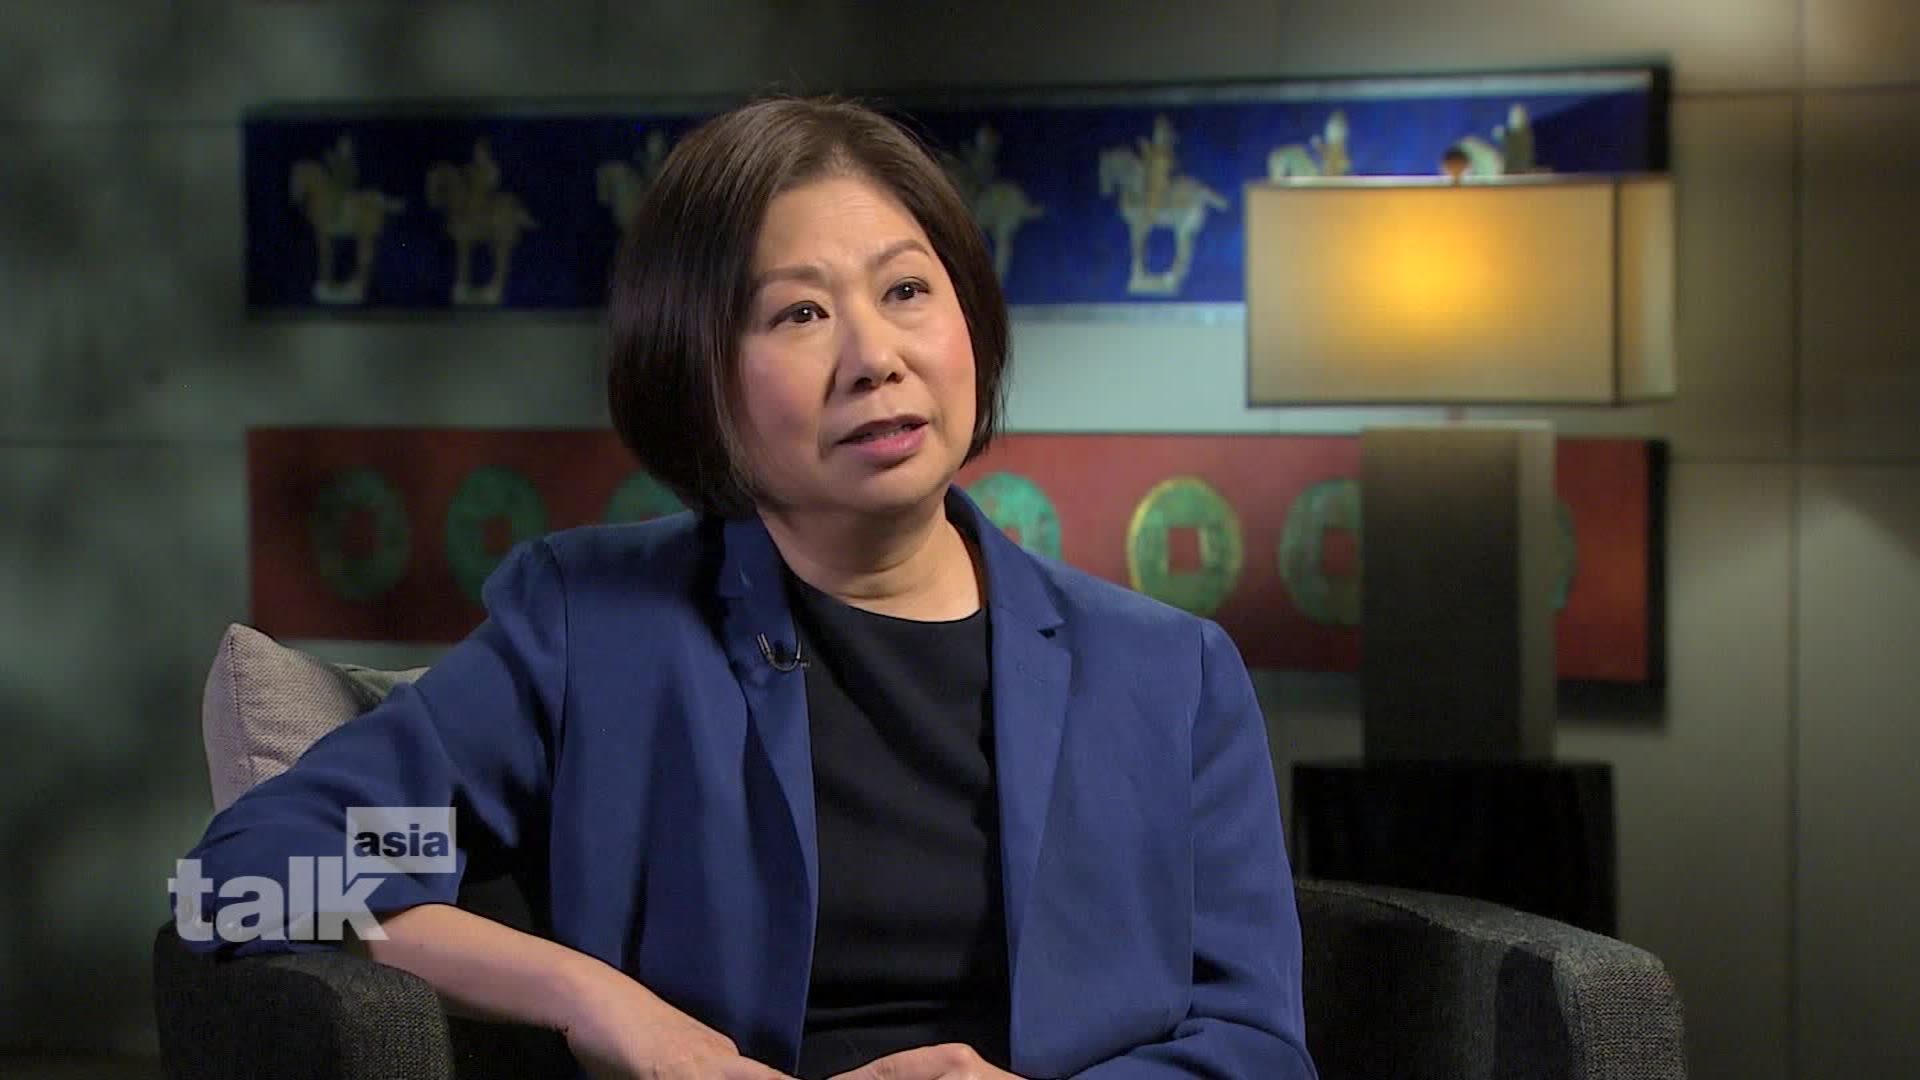 Meet one of Asia's most powerful businesswomen